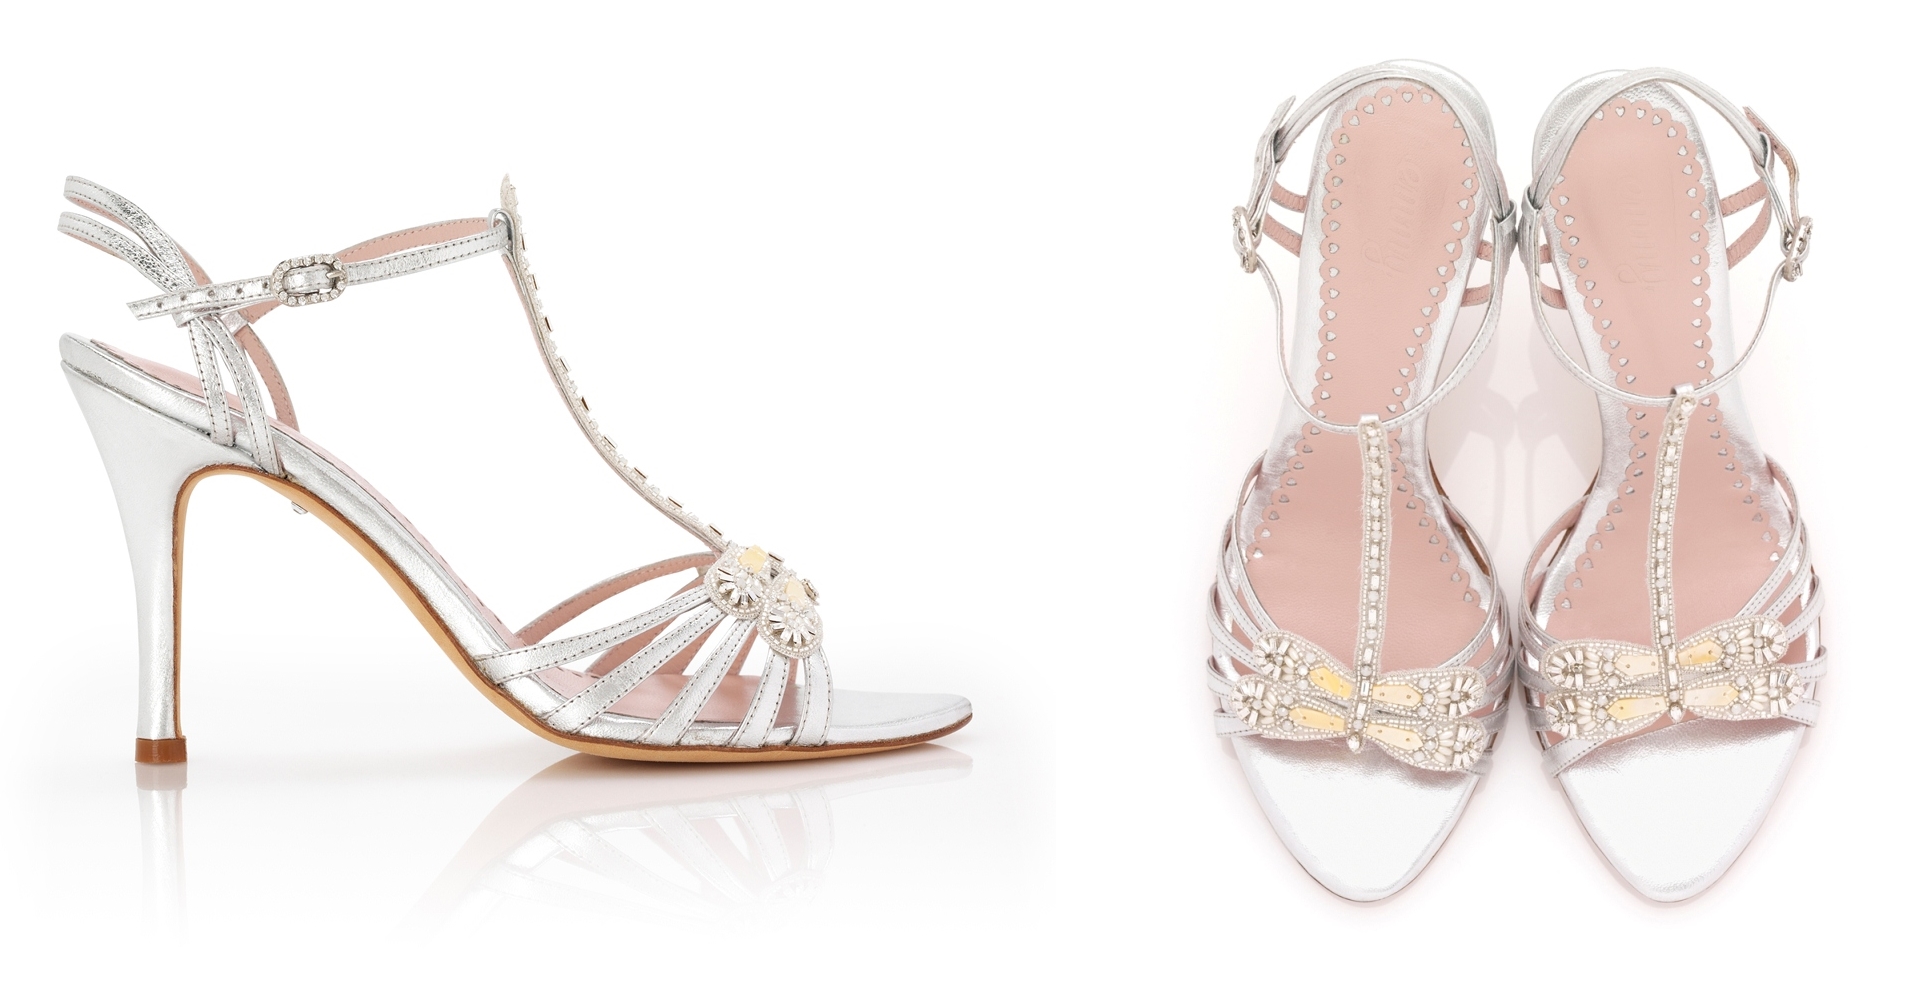 Silver Dragonfly Sandal from the Celeste Collection by Emmy